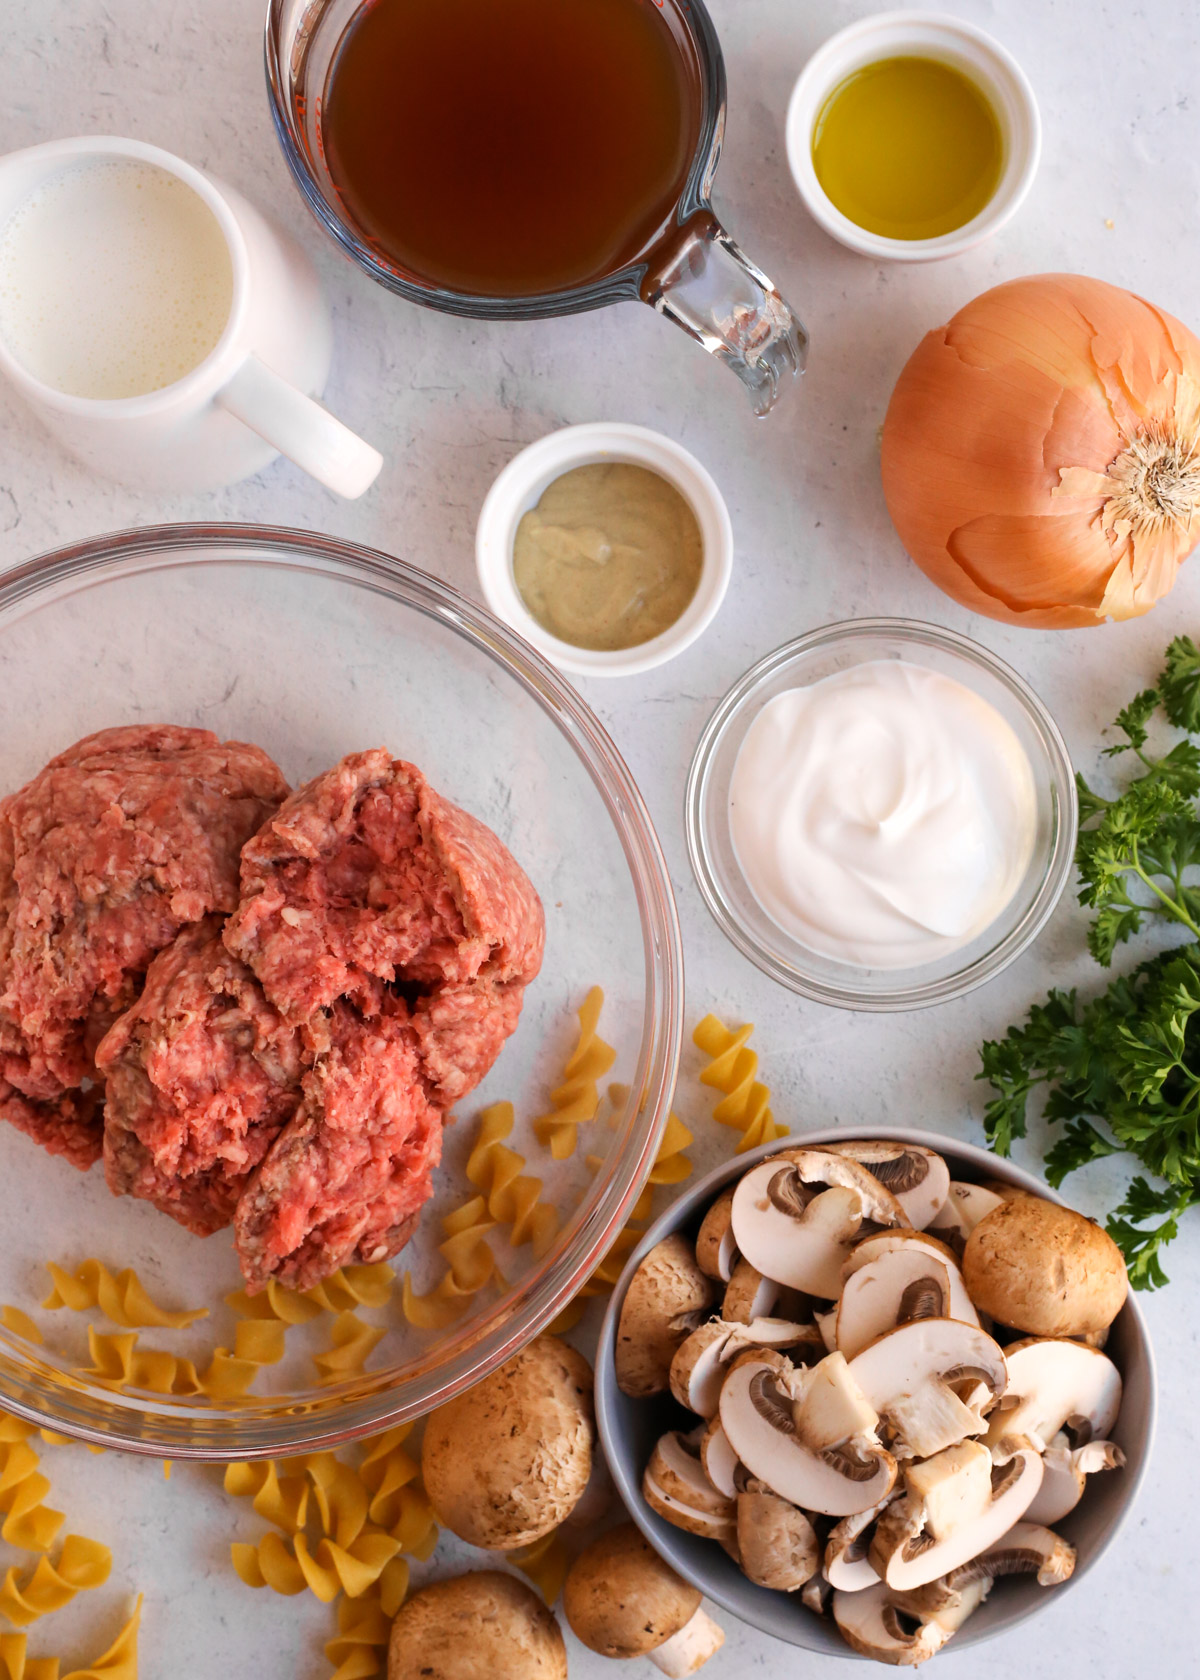 Display of ingredients to make a ground beef stroganoff recipe, include an onion, mushrooms, egg noodles, fresh parsley, various ramekins with sour cream, mustard, and beef broth, plus a prep bowl with uncooked ground beef